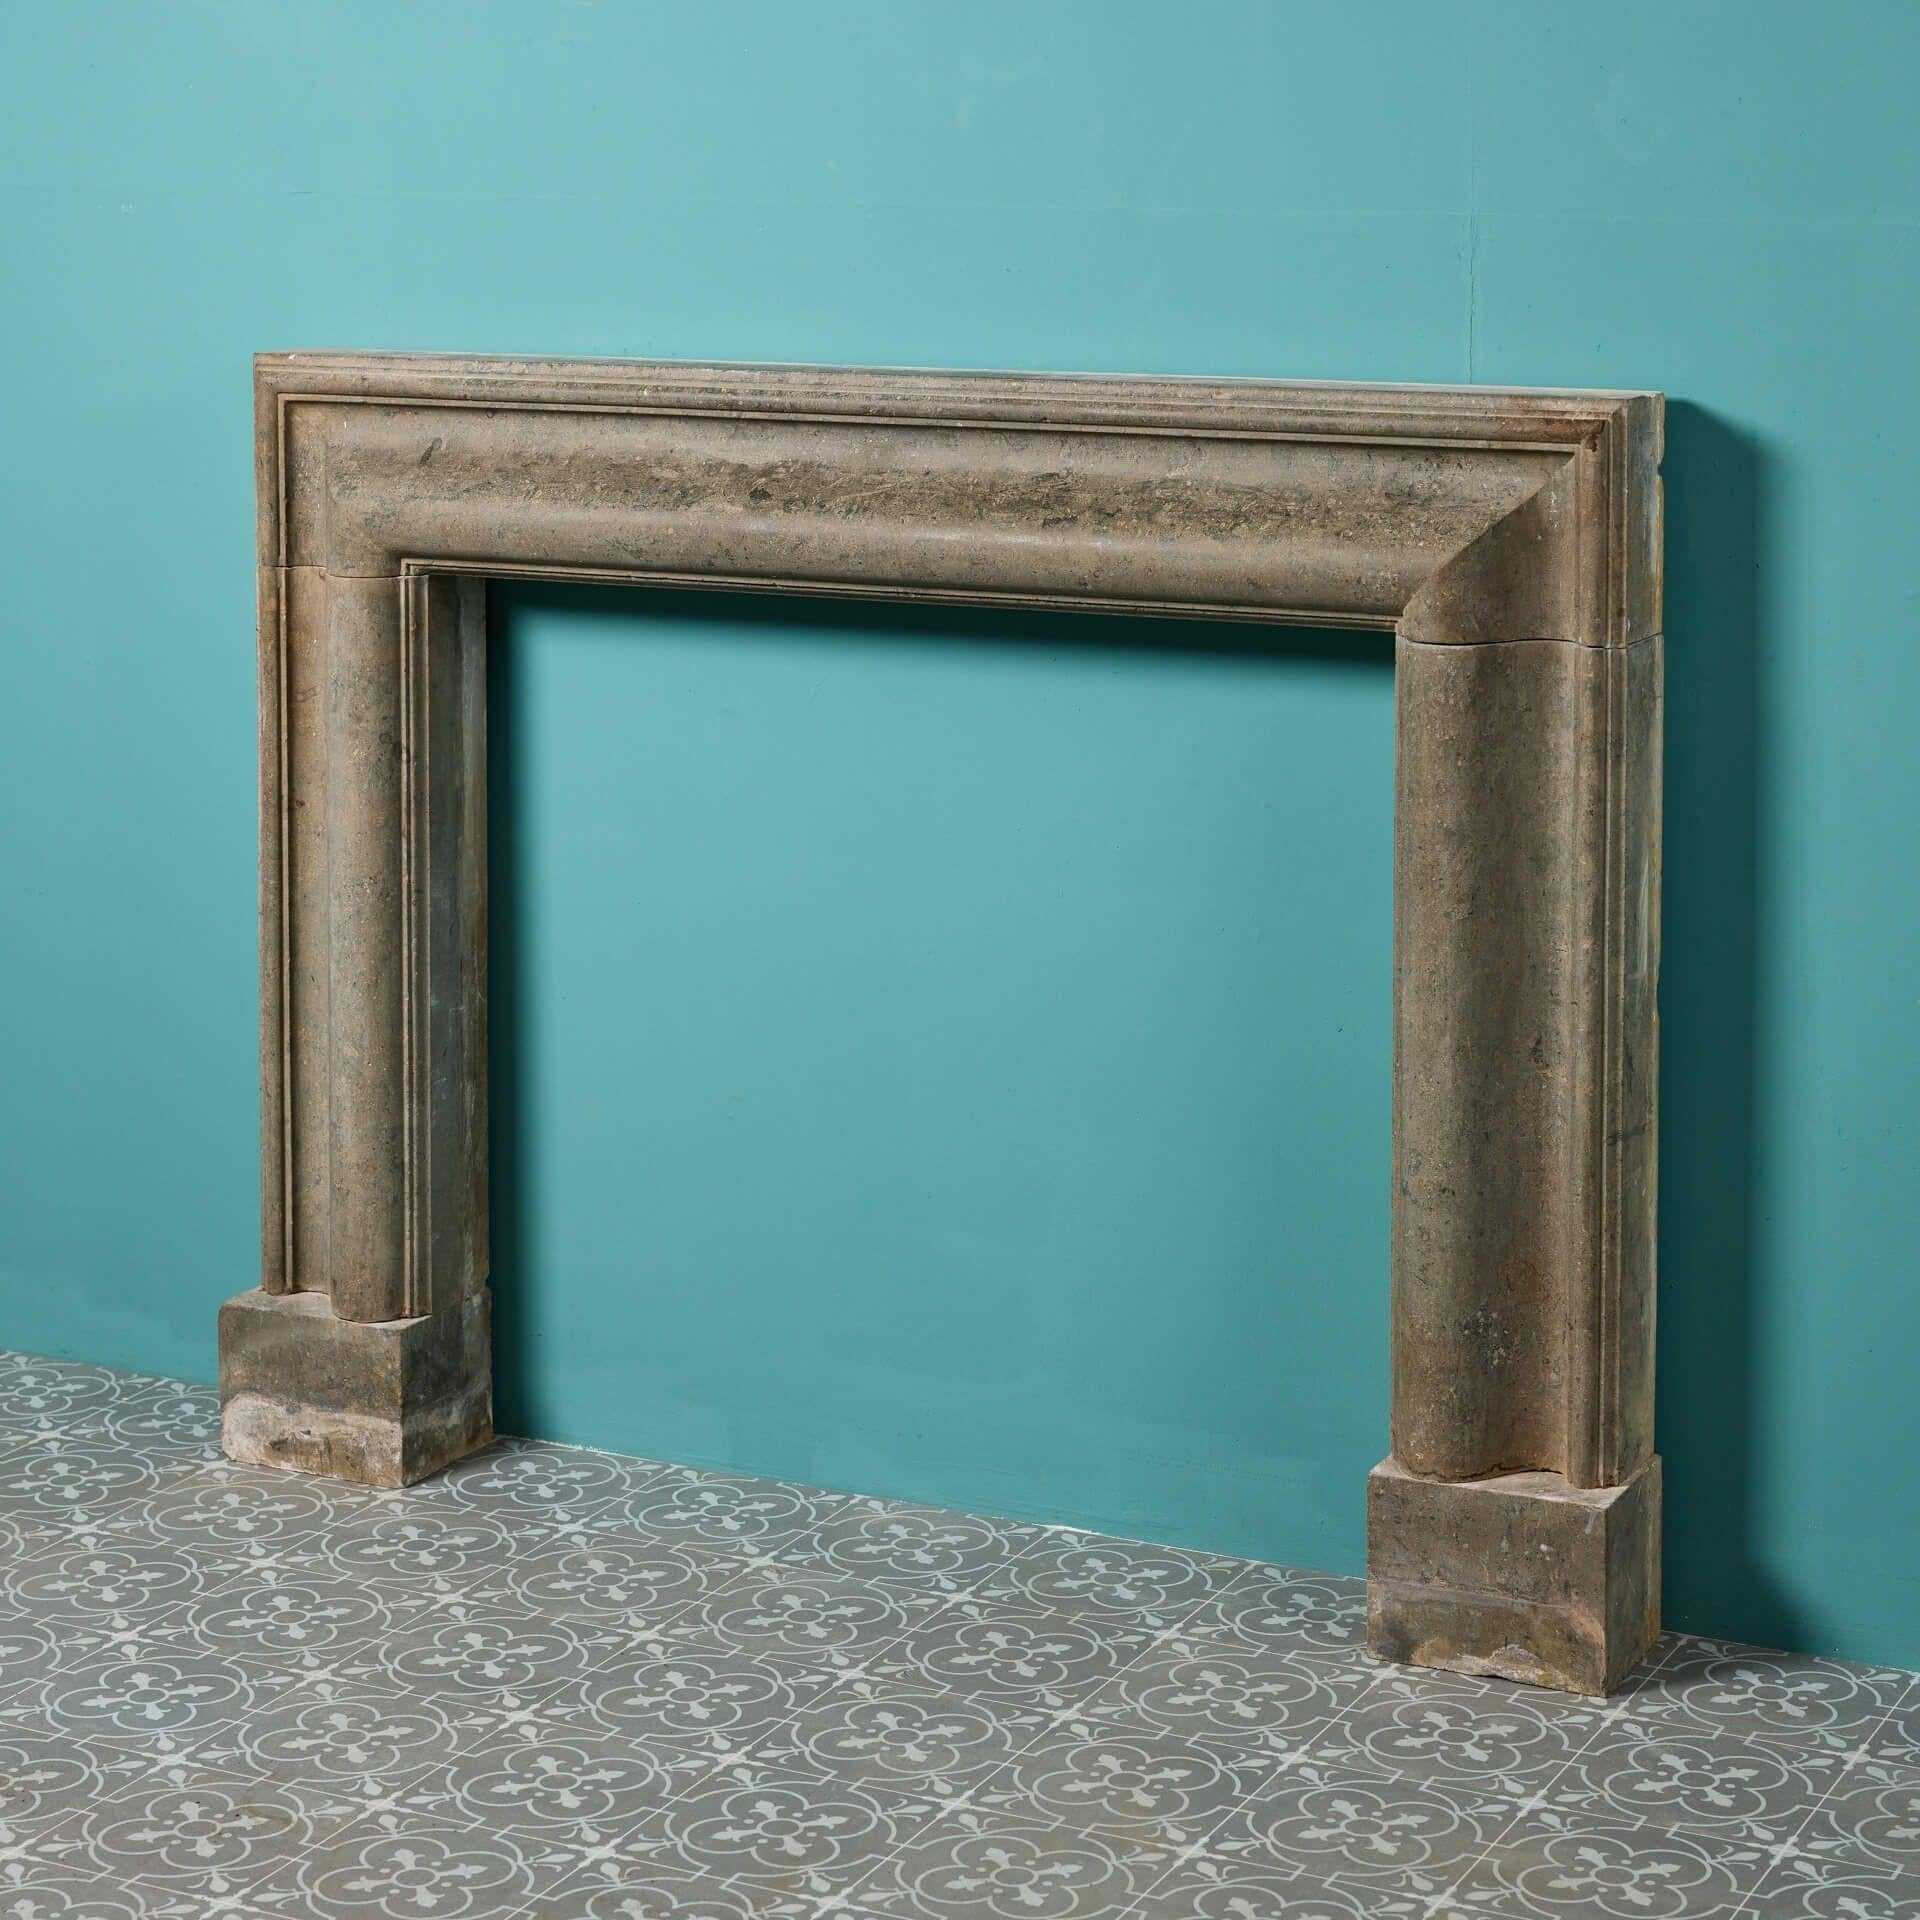 An English reclaimed limestone fire mantel in bolection style dating from the early 20th century. Though over 120 years old, this bolection fireplace looks stunning in both period and modern settings thanks to its simple lines and neutral colour.